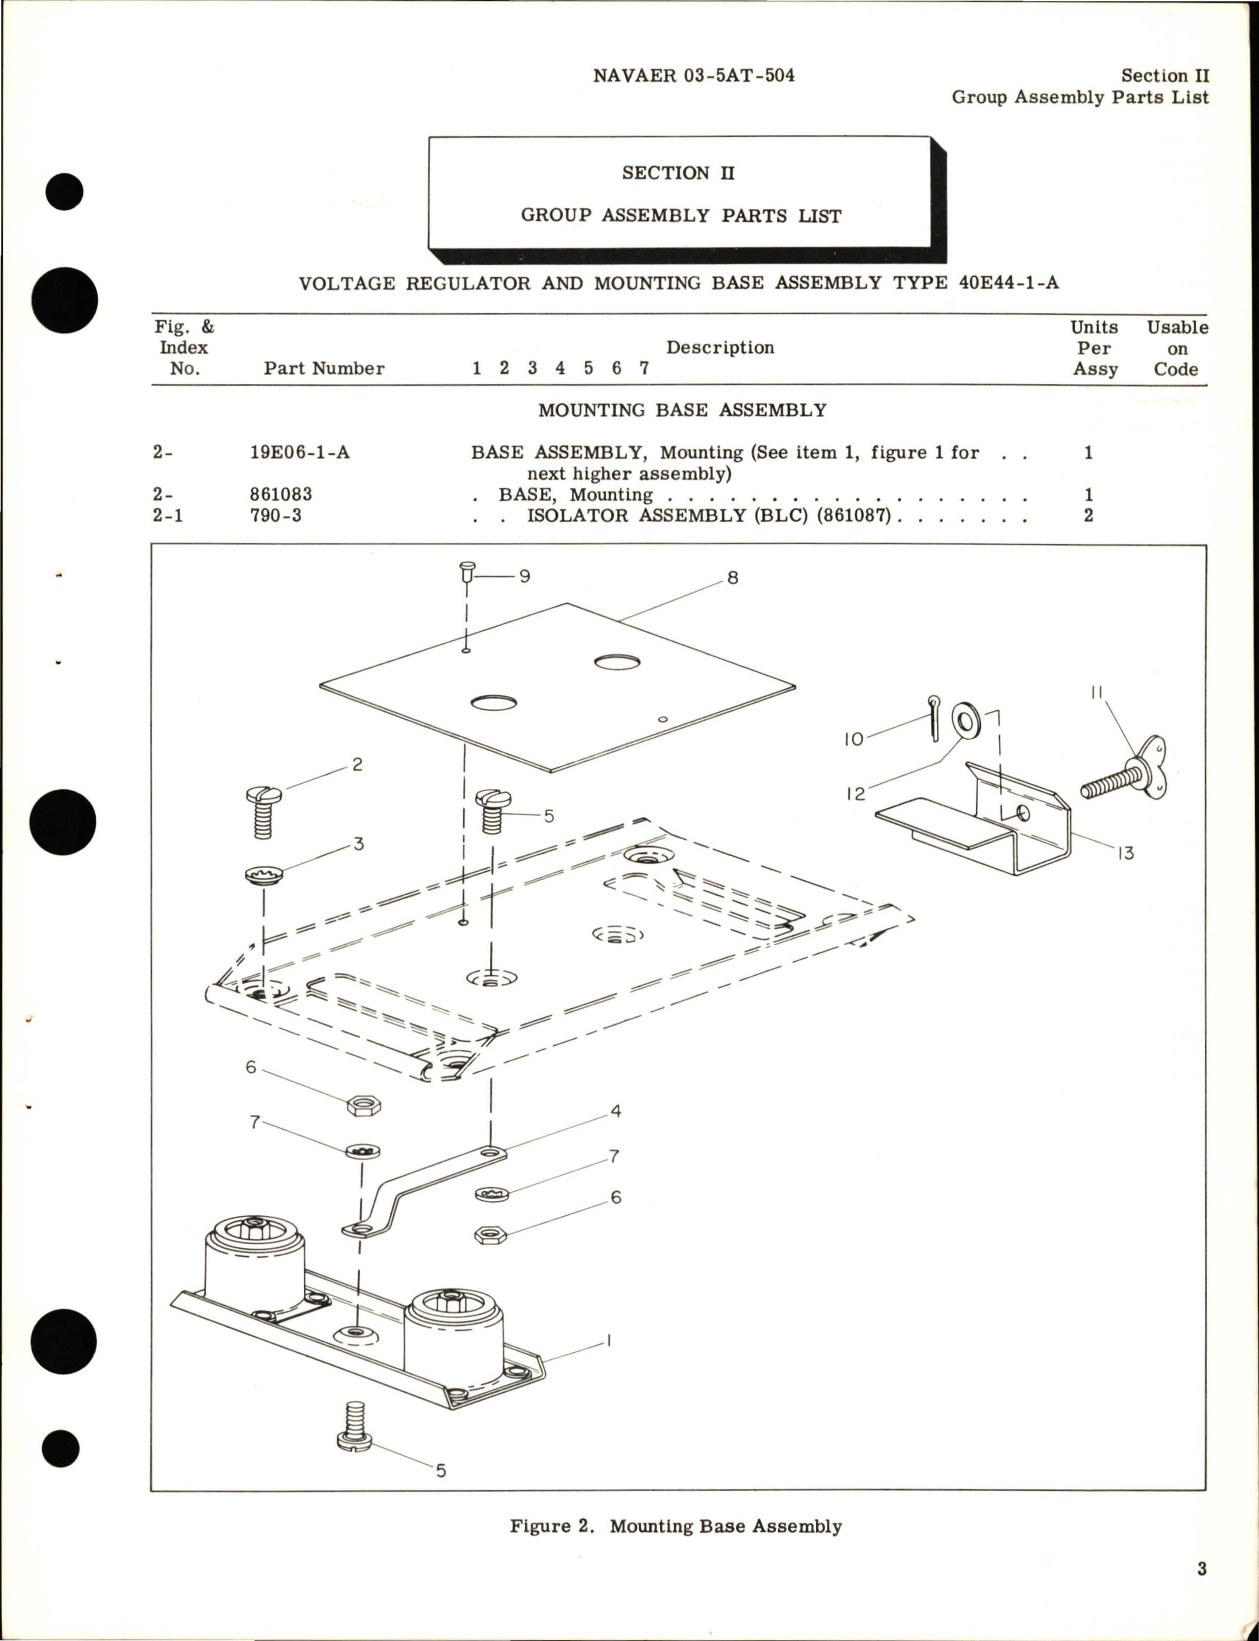 Sample page 7 from AirCorps Library document: Illustrated Parts Breakdown for Voltage Regulator and Mounting Base Assembly - Type 40E44-1-A